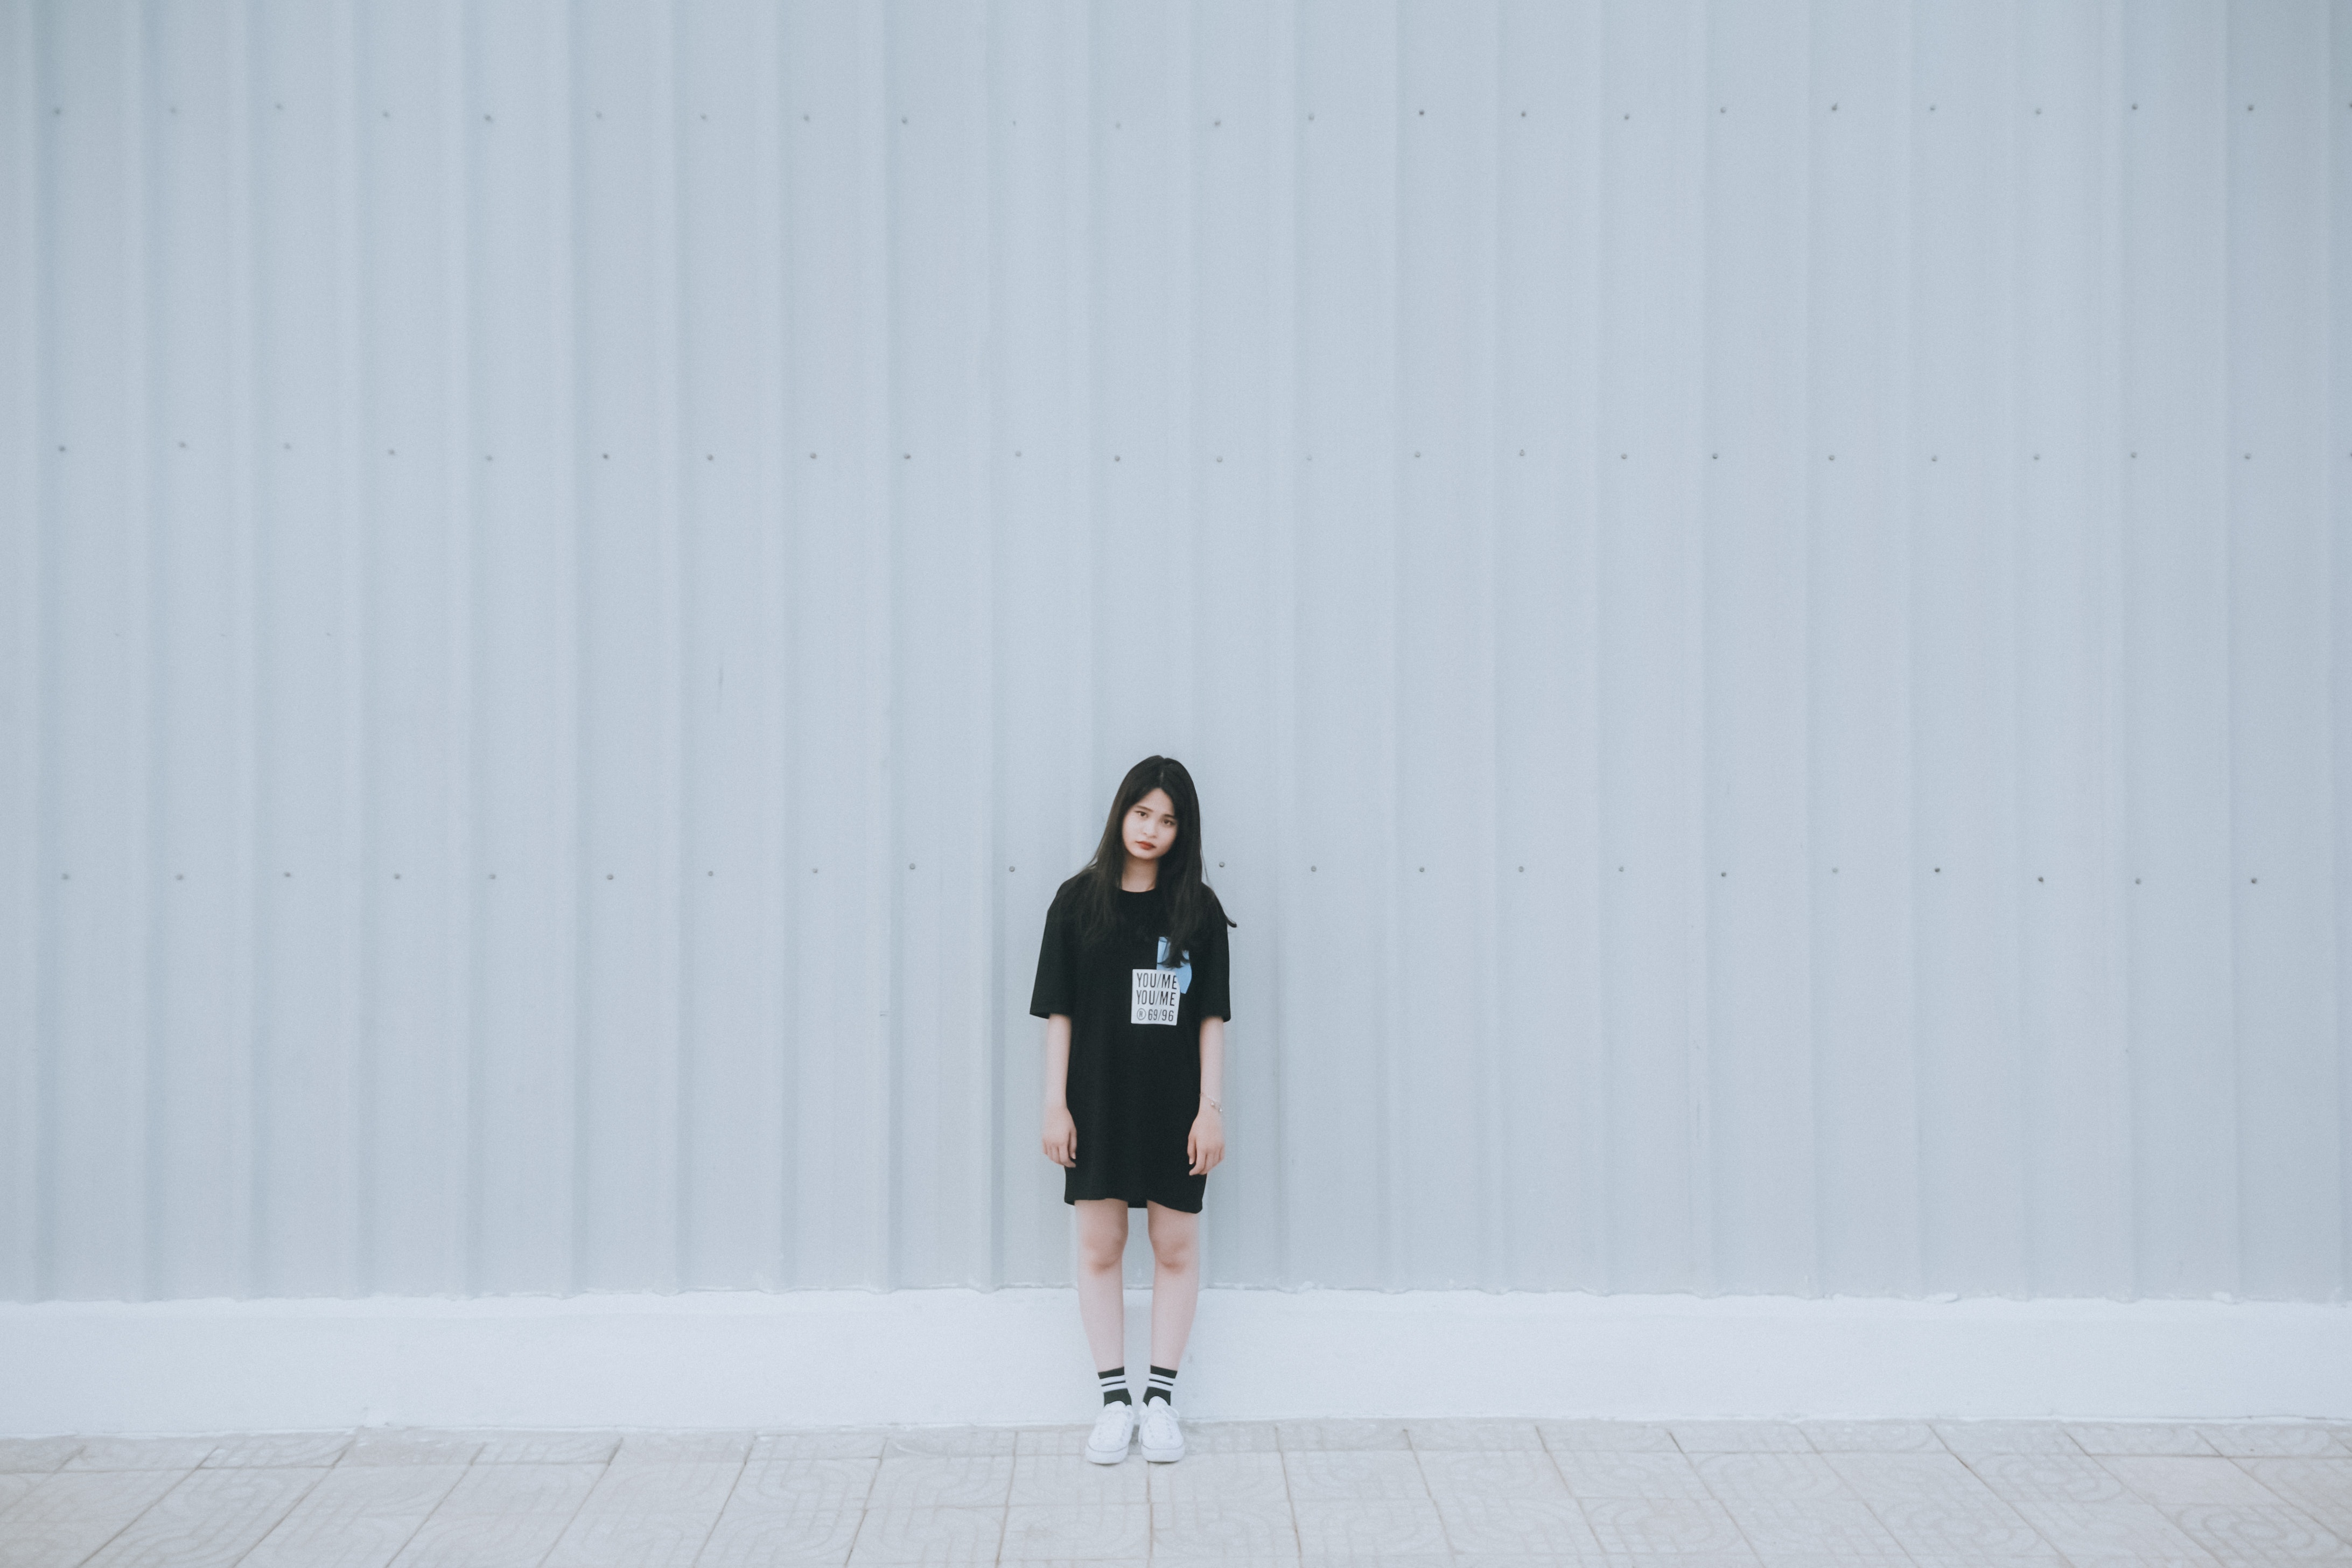 Woman in black elbow sleeve shirt and black shorts standing behind white wall photo